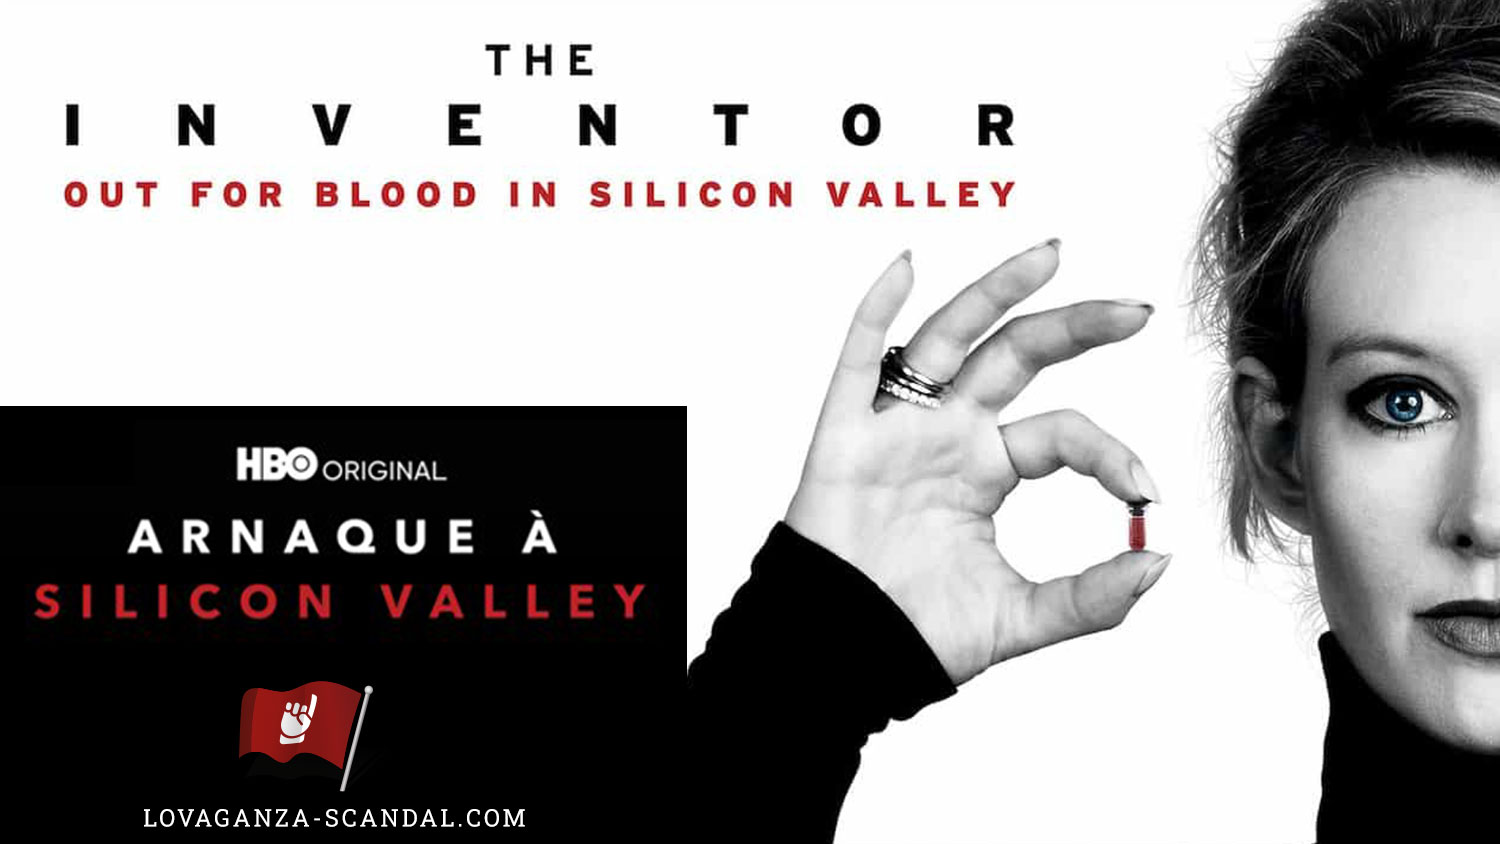 EN-the-inventor-out-for-blood-in-silicon-valley-FR-Arnaque-à-la-silicone-valley